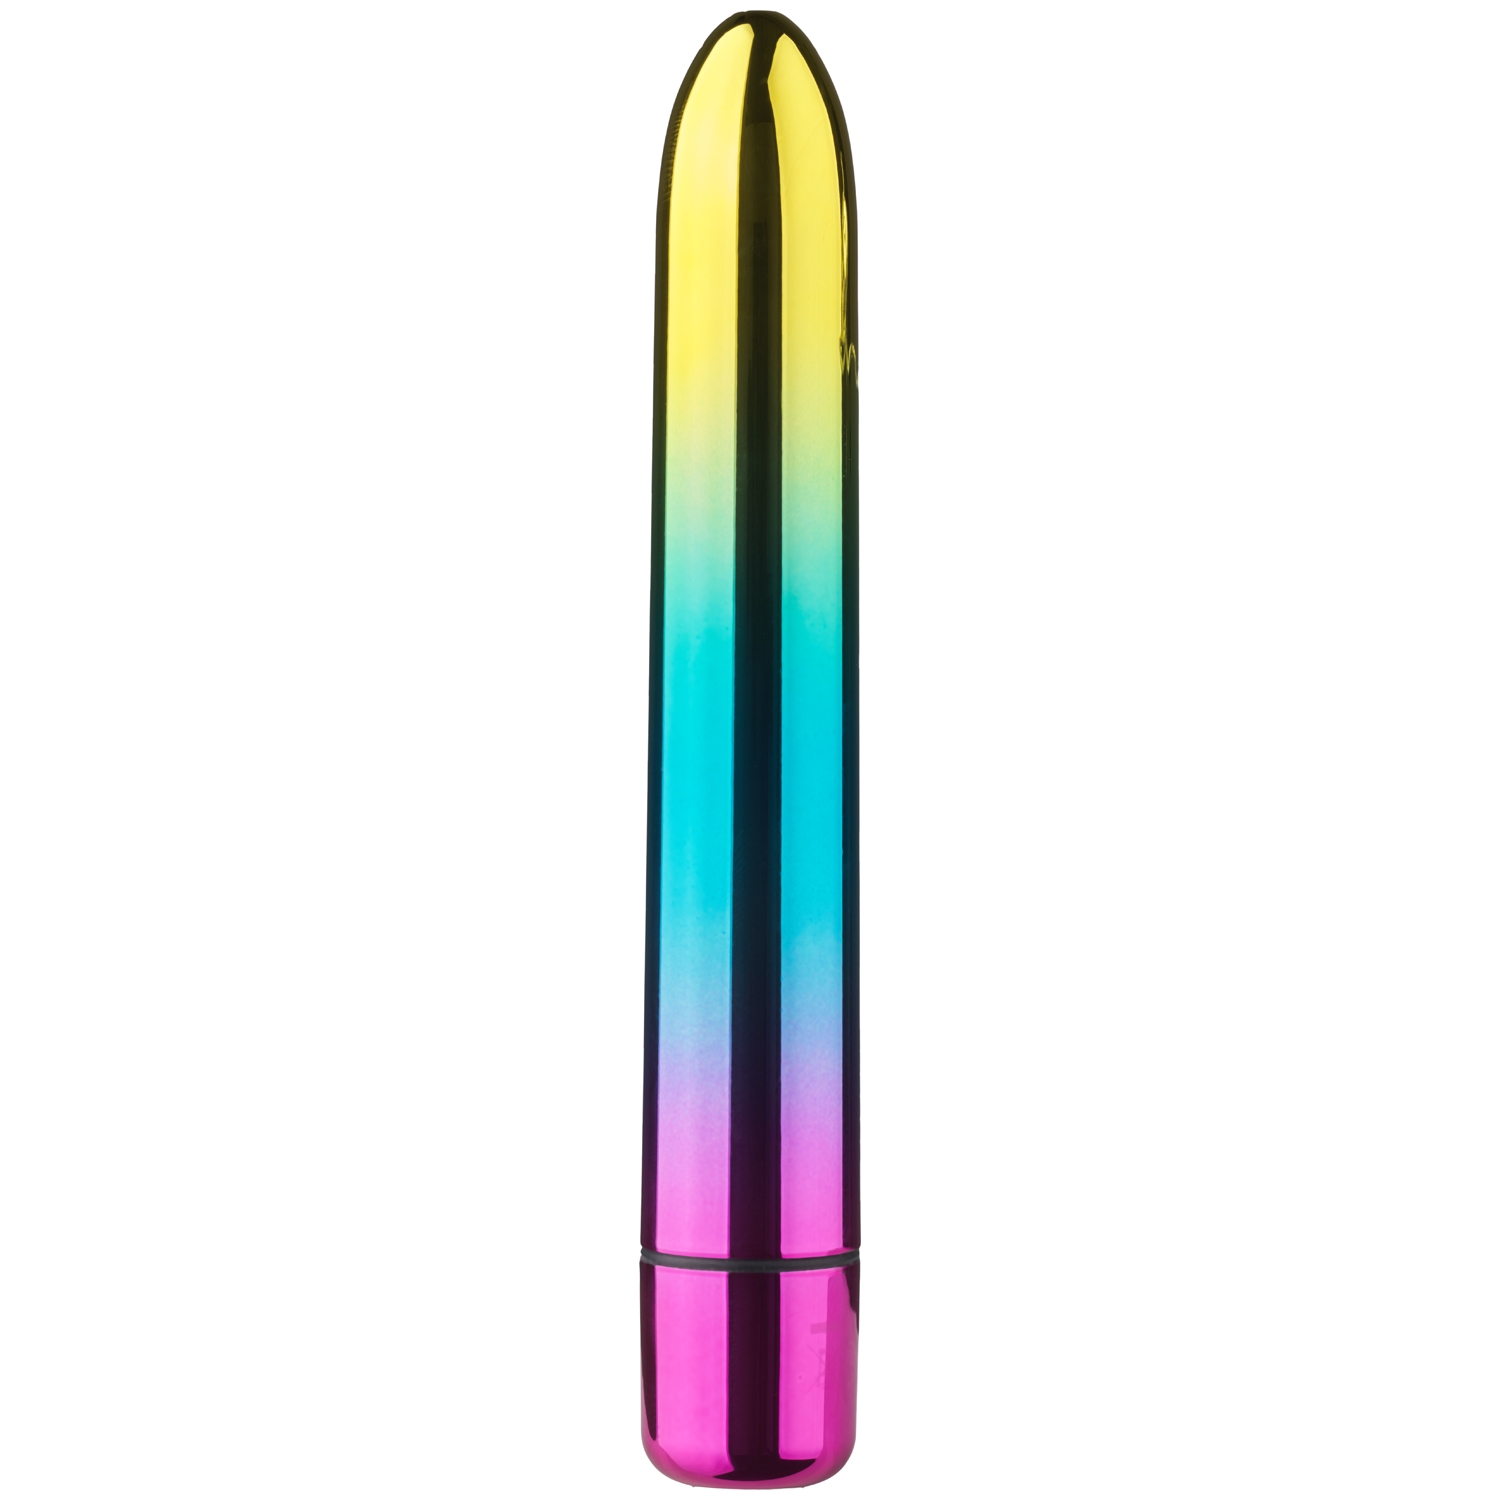 Rocks Off Prism Somewhere Over the Rainbow Bullet Vibrator - Mixed colours